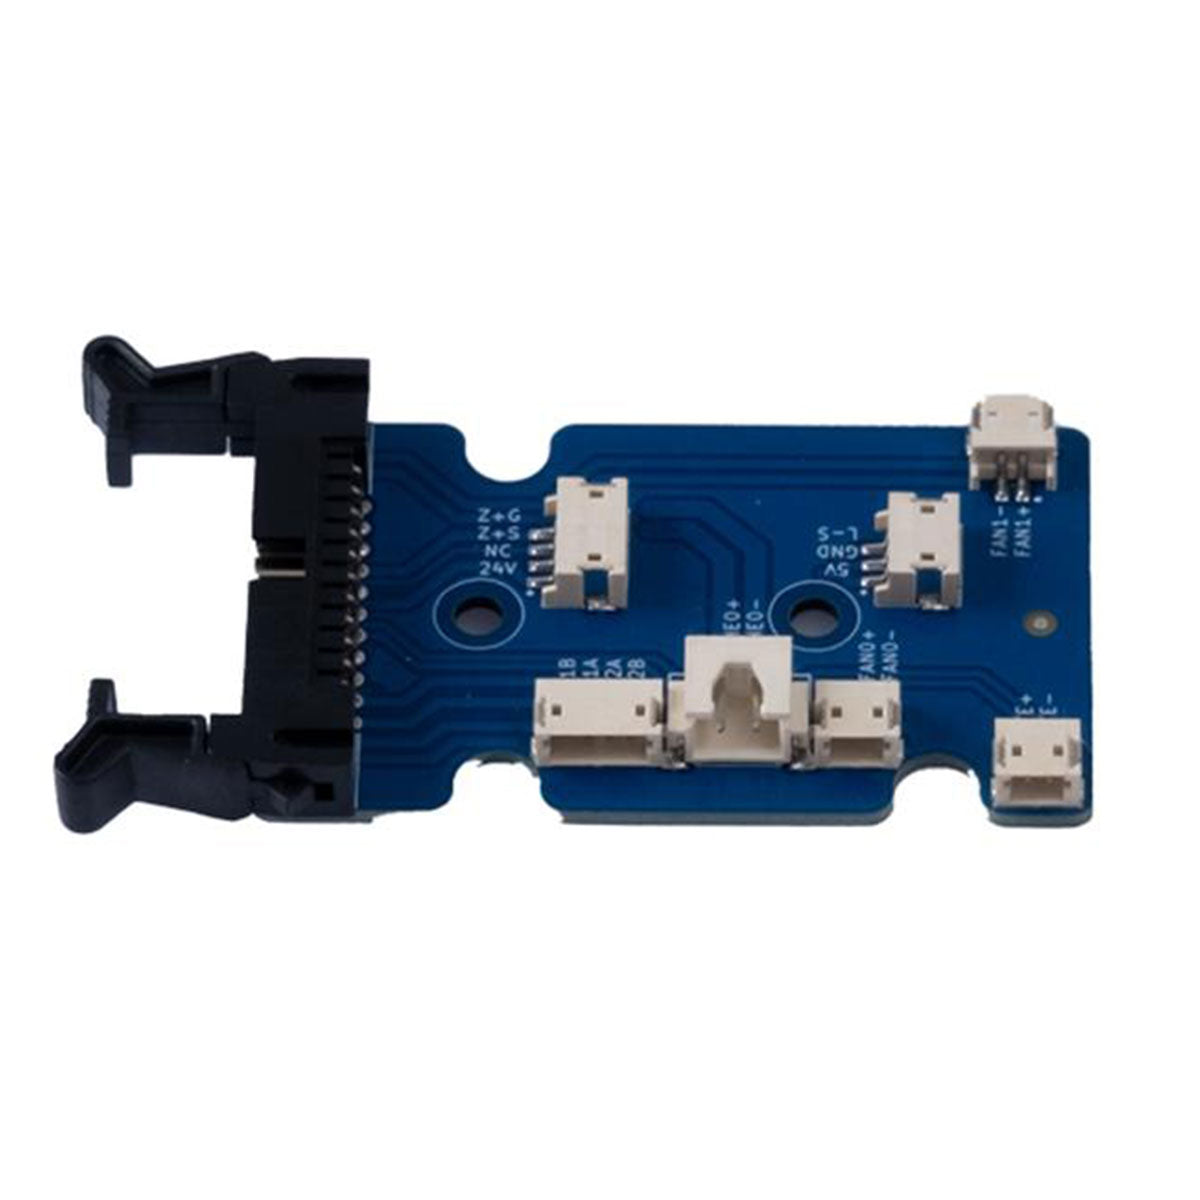 Extruder Adapter Plate - X4 Plus